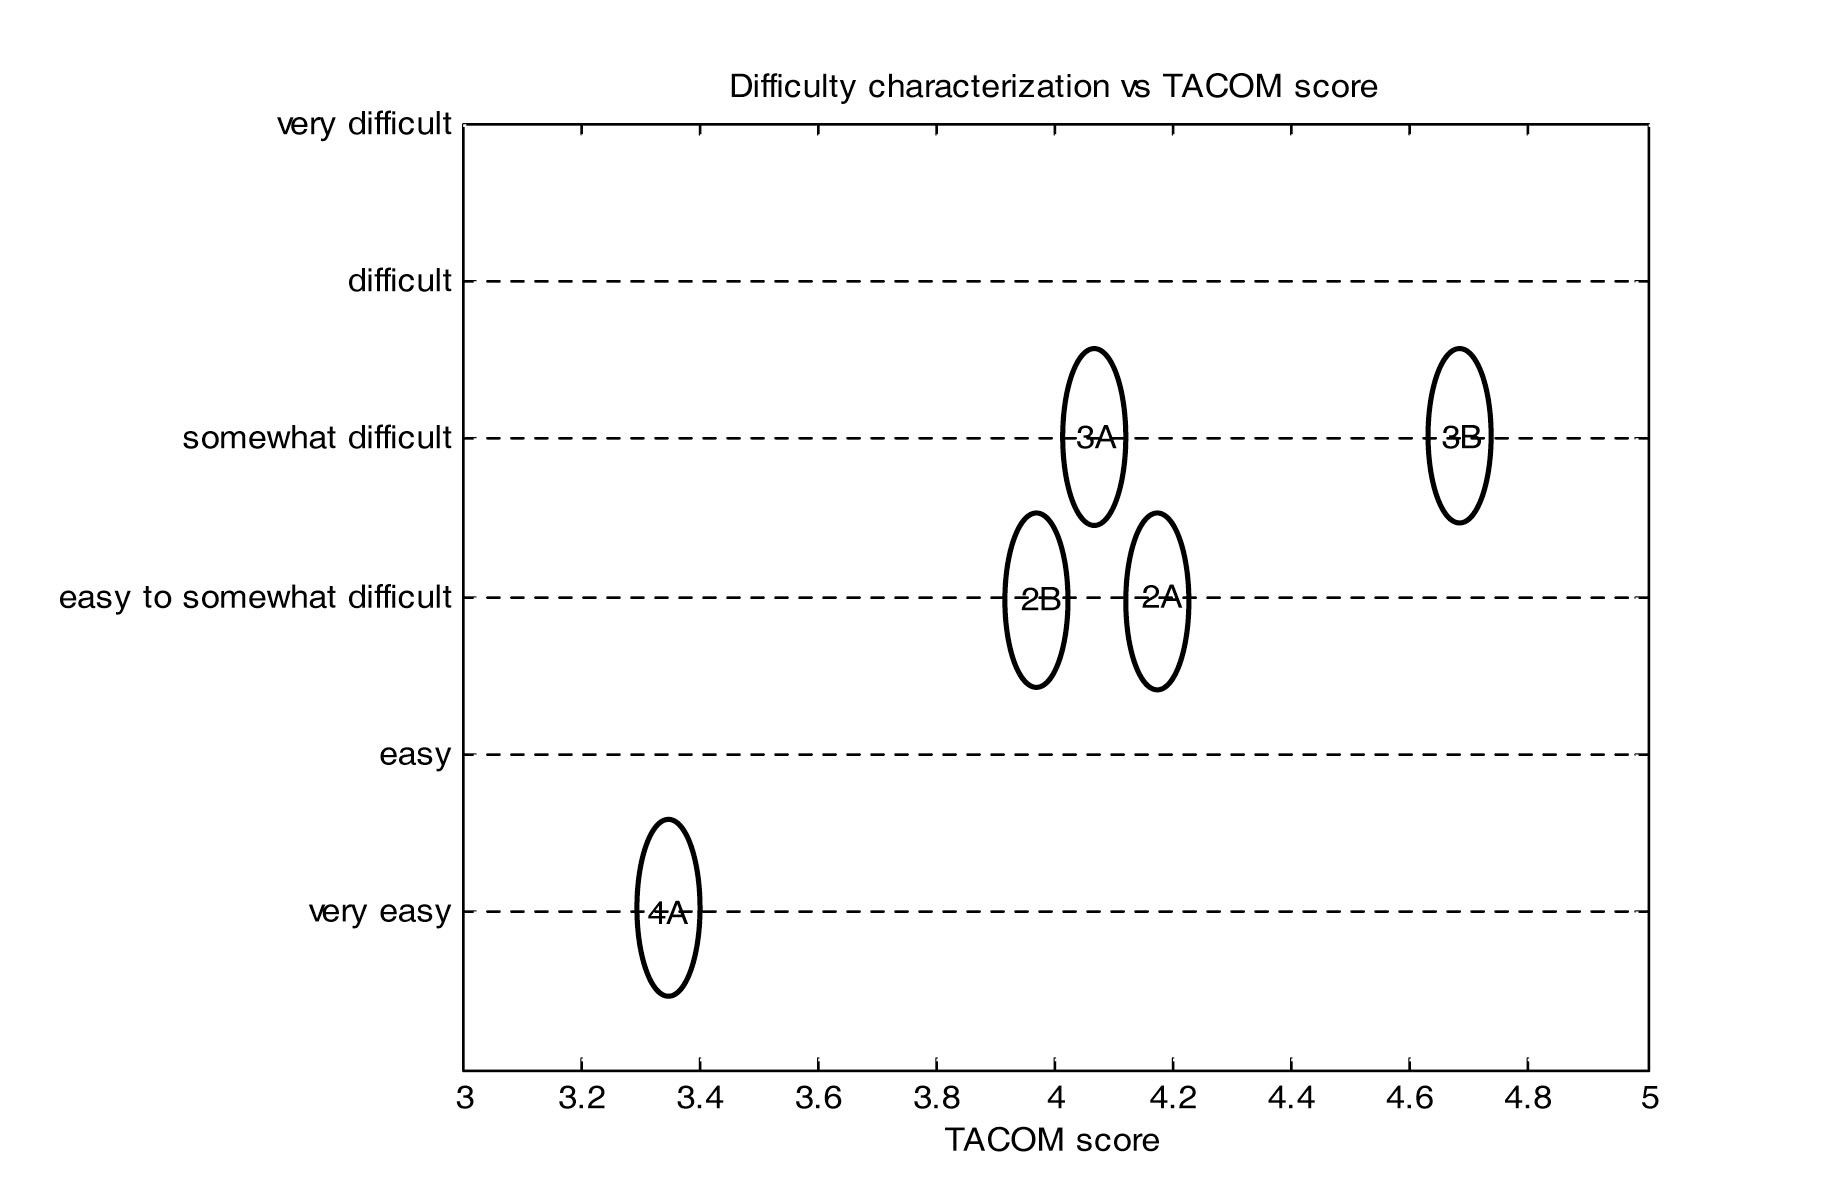 Difficulty Characterization and the TACOM Score (Ellipses Indicate that Characterization Should be Indented as a Range, Not a Point Value)